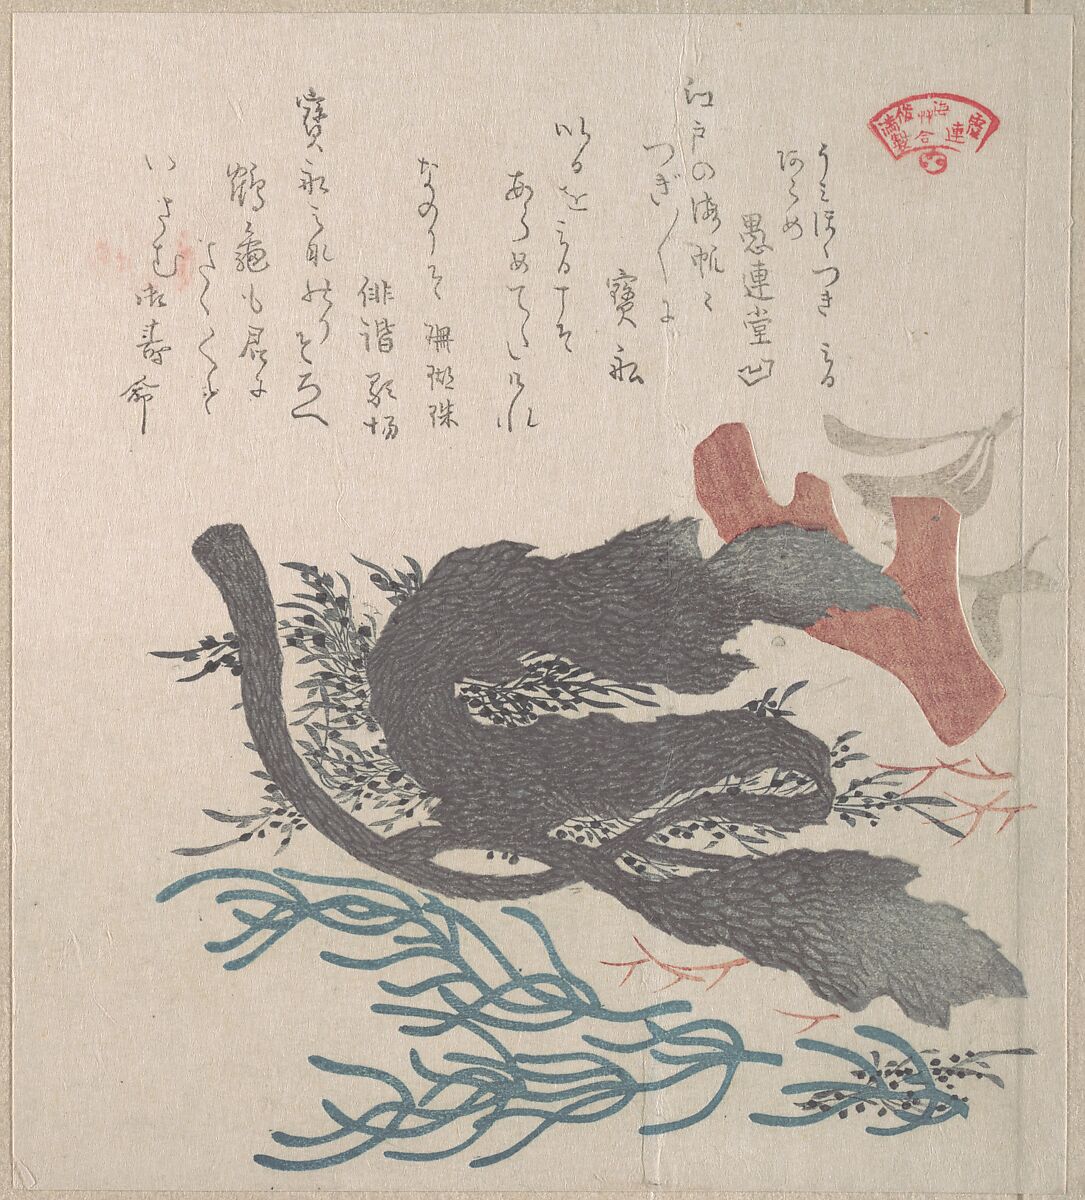 Various Seaweed, Kubo Shunman (Japanese, 1757–1820) (?), Part of an album of woodblock prints (surimono); ink and color on paper, Japan 